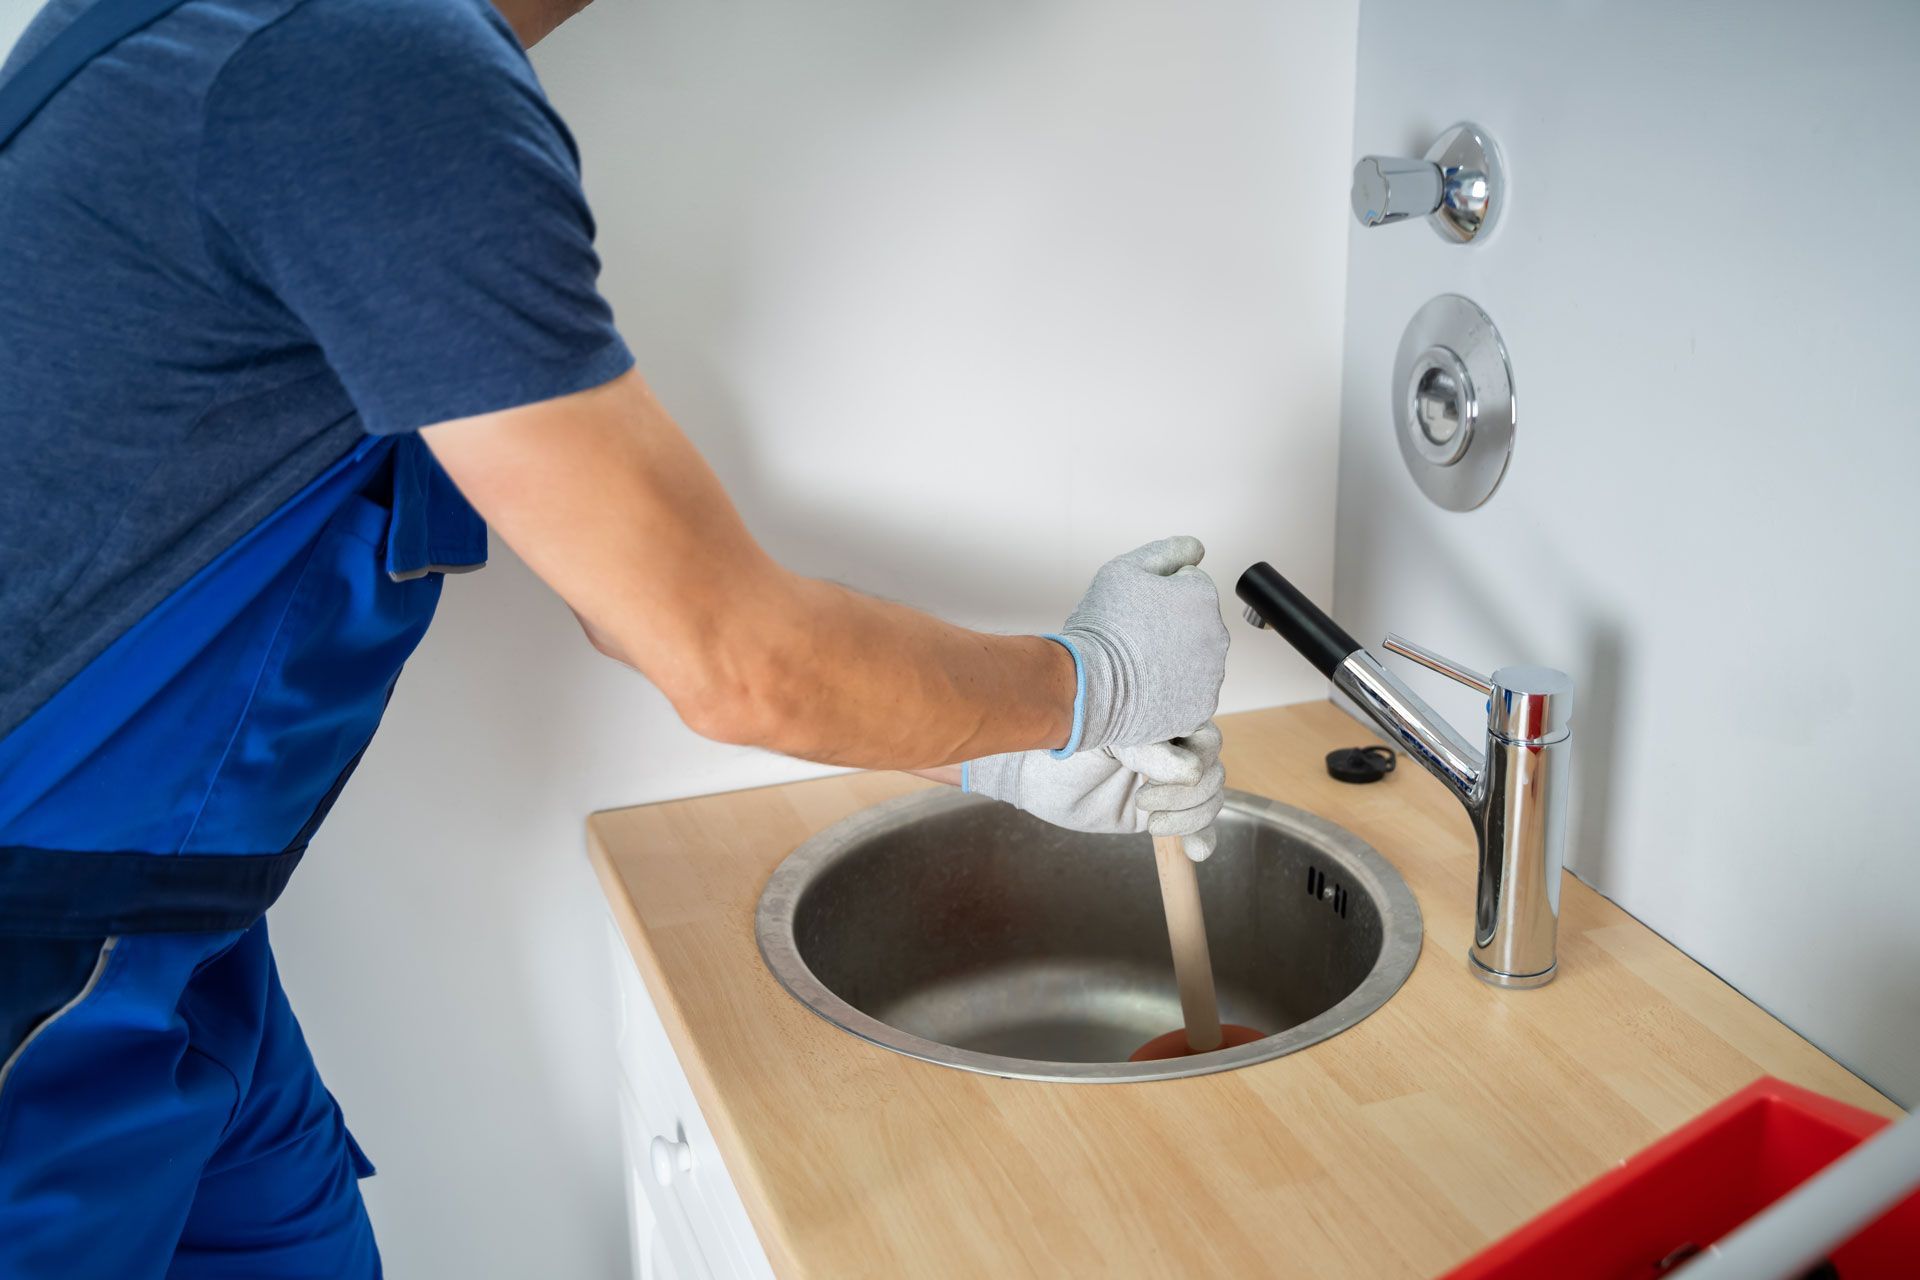 A man is using a plunger to unblock a kitchen sink.